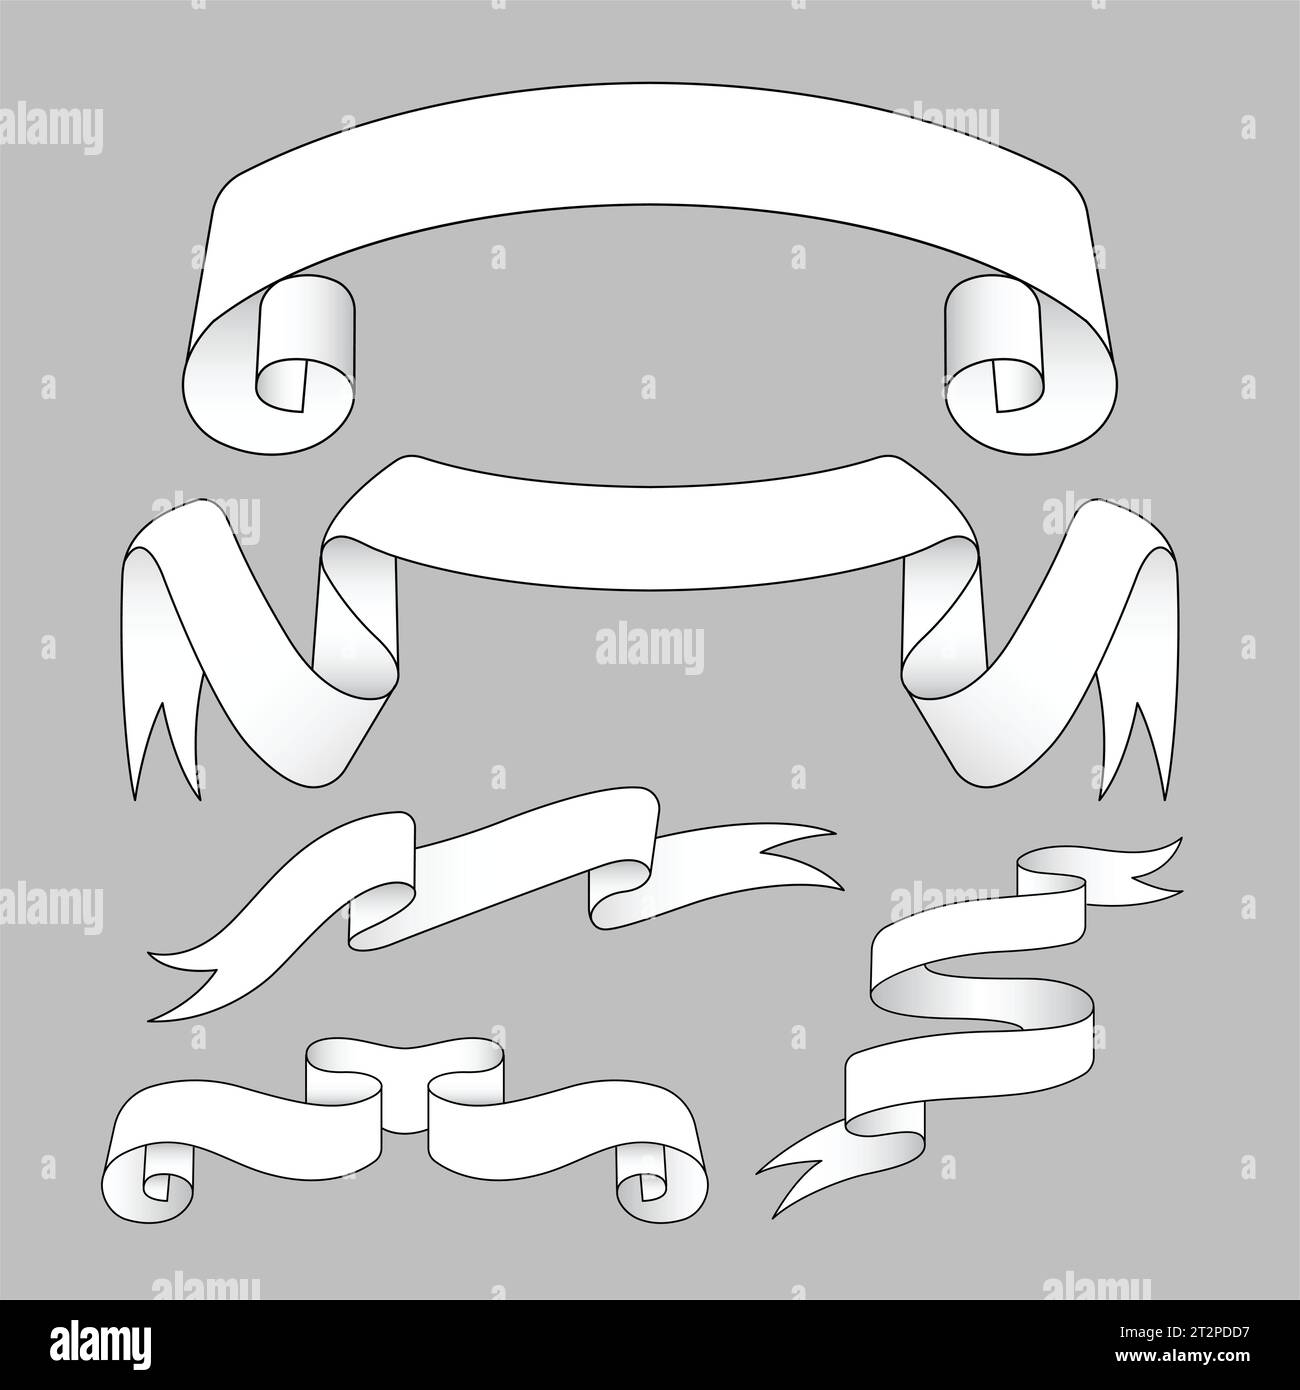 ribbon paper scroll label template silhouette illustration Stock Vector